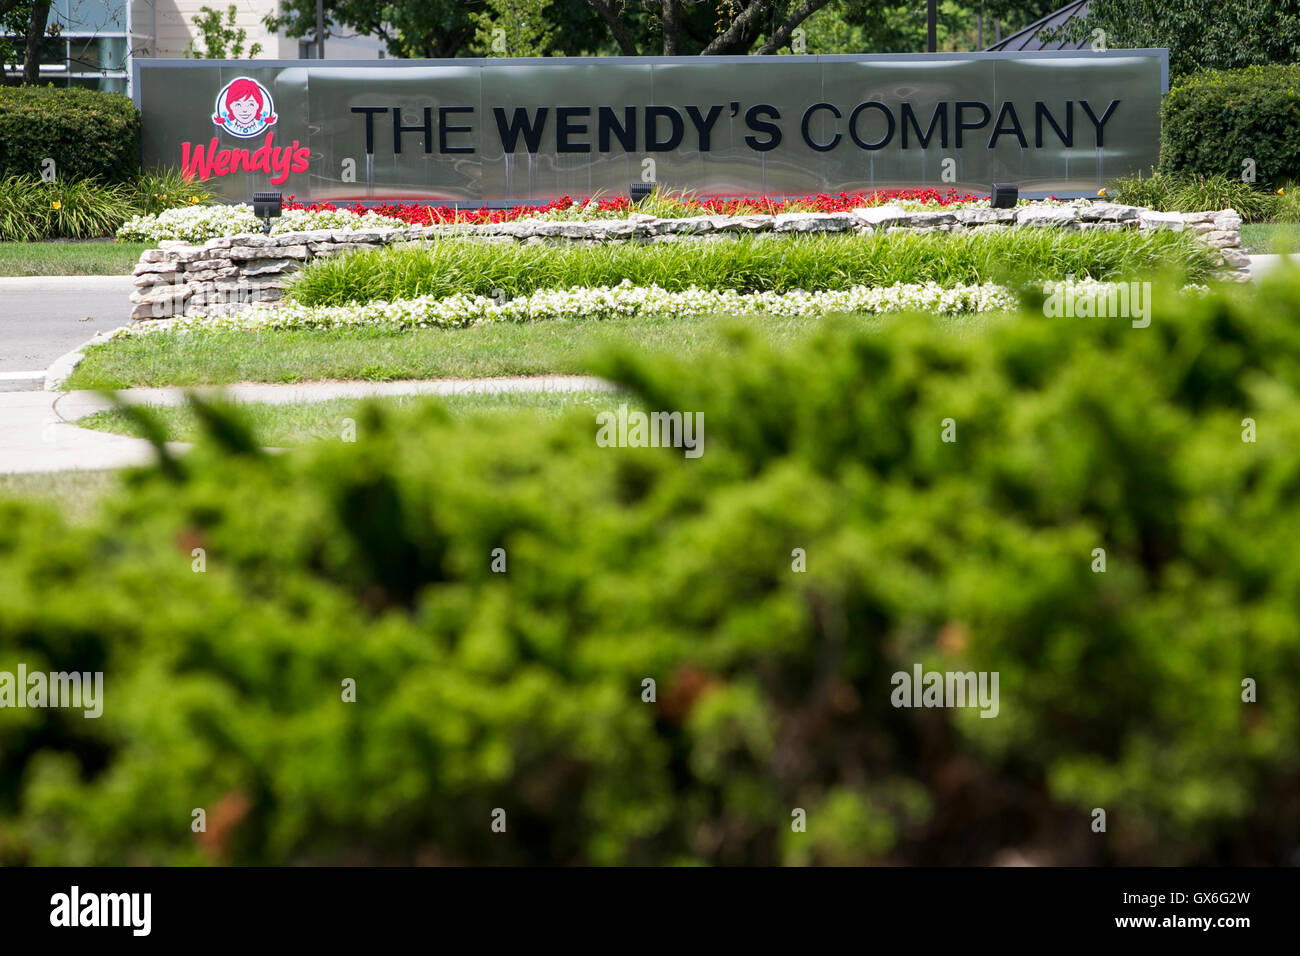 A logo sign outside of the headquarters of The Wendy's Company fast food restaurant chain in Dublin, Ohio on July 23, 2016. Stock Photo